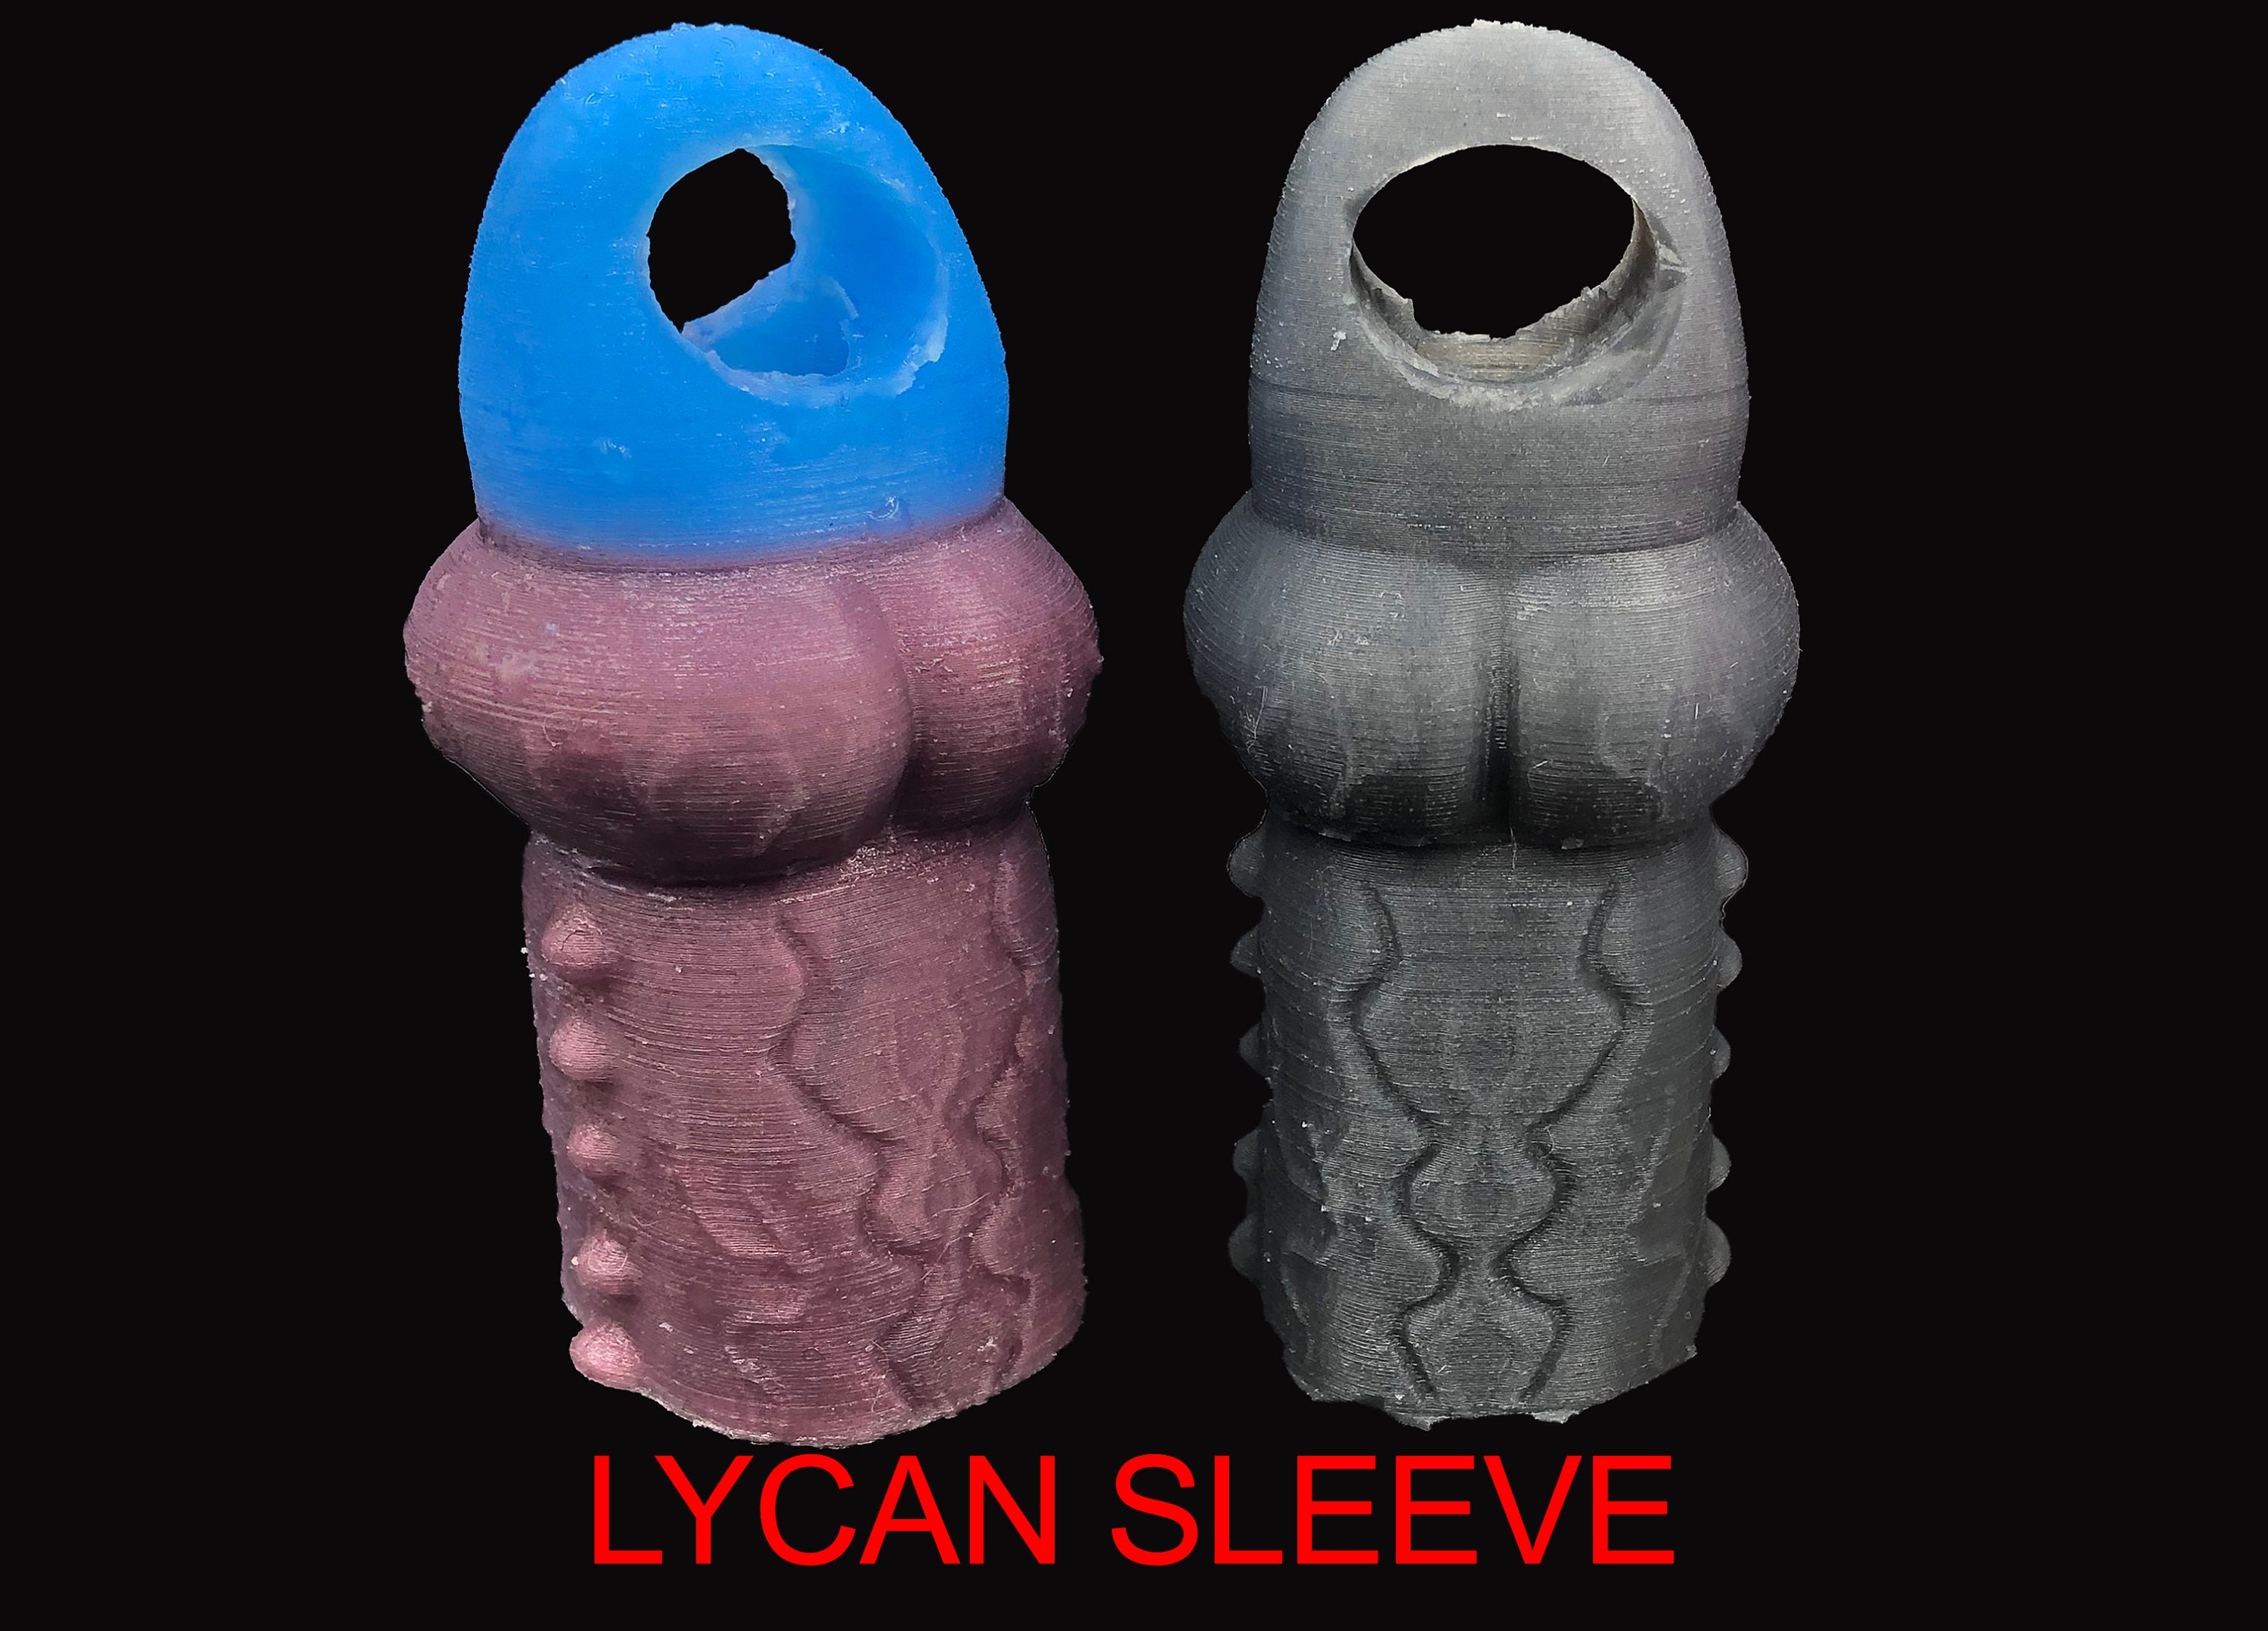 Lycan Sleeve-sex Toy Couples Toys Men/dildo Enhancer picture picture